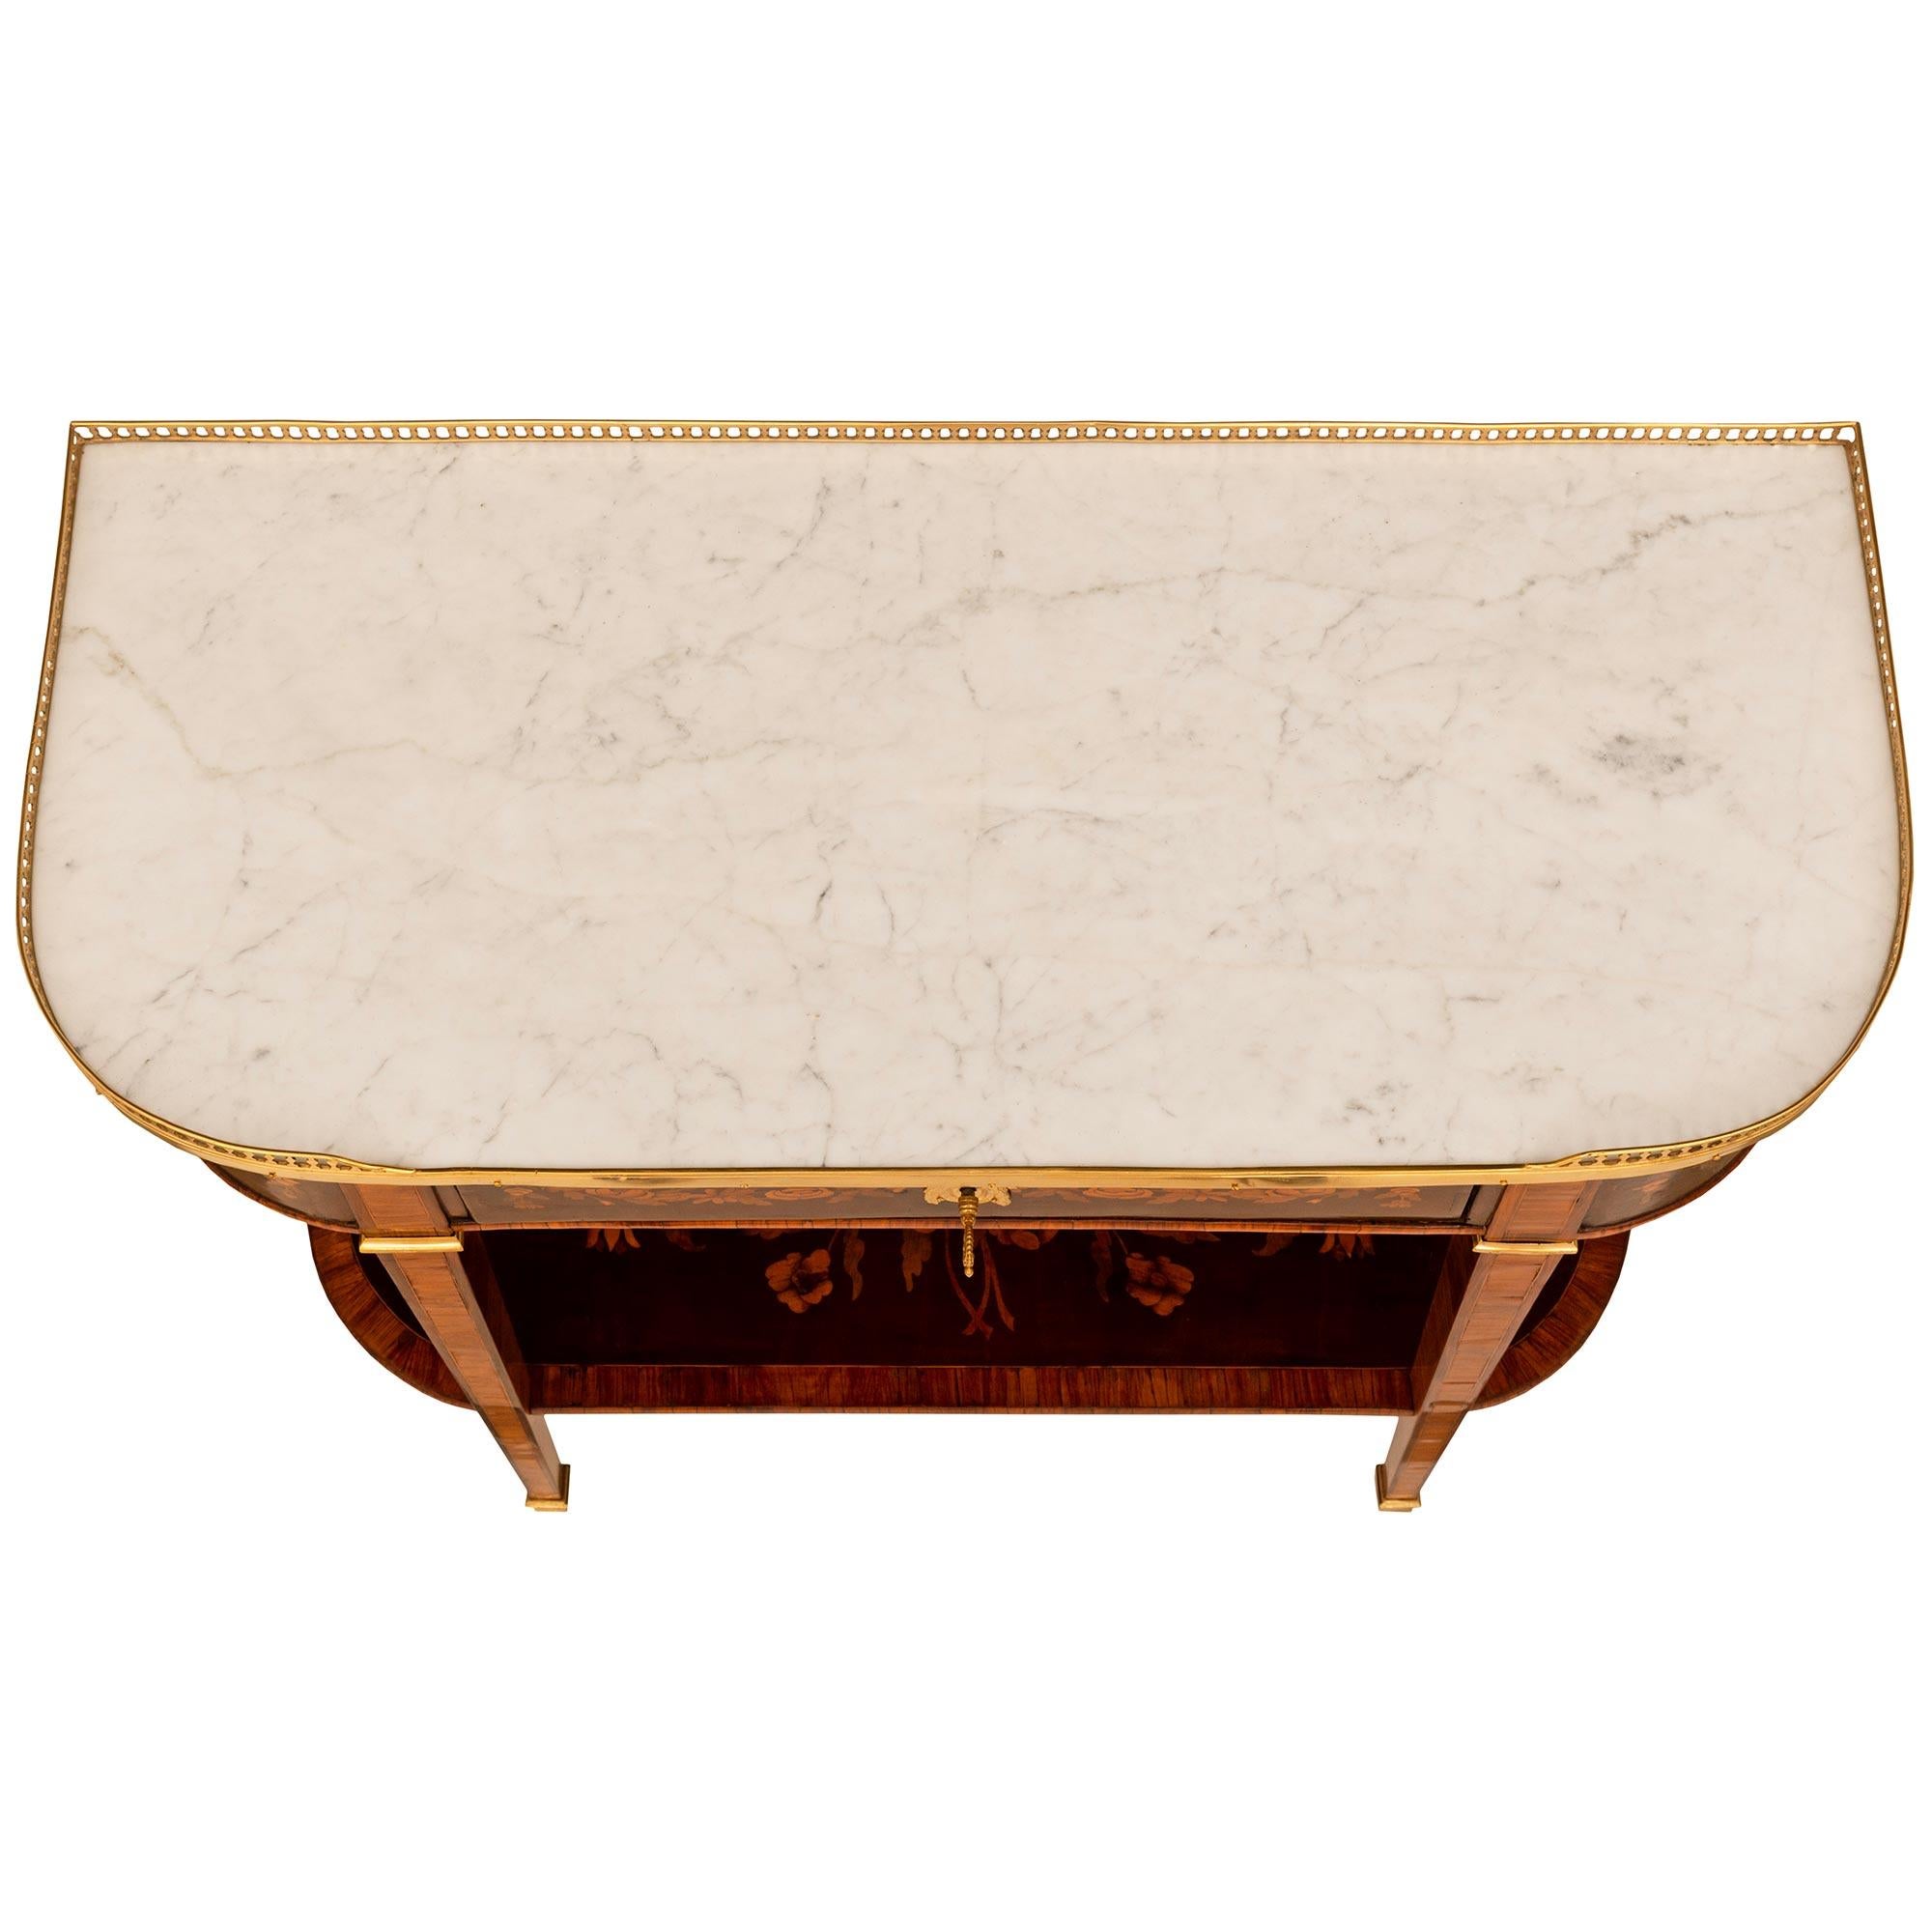 A stunning French 19th century Louis XVI st. Tulipwood, Walnut, Ormolu and white Carrara marble console. The demi lune shaped console is raised on four square tapered legs with Ormolu sabots extending up to a single display tier decorated with a